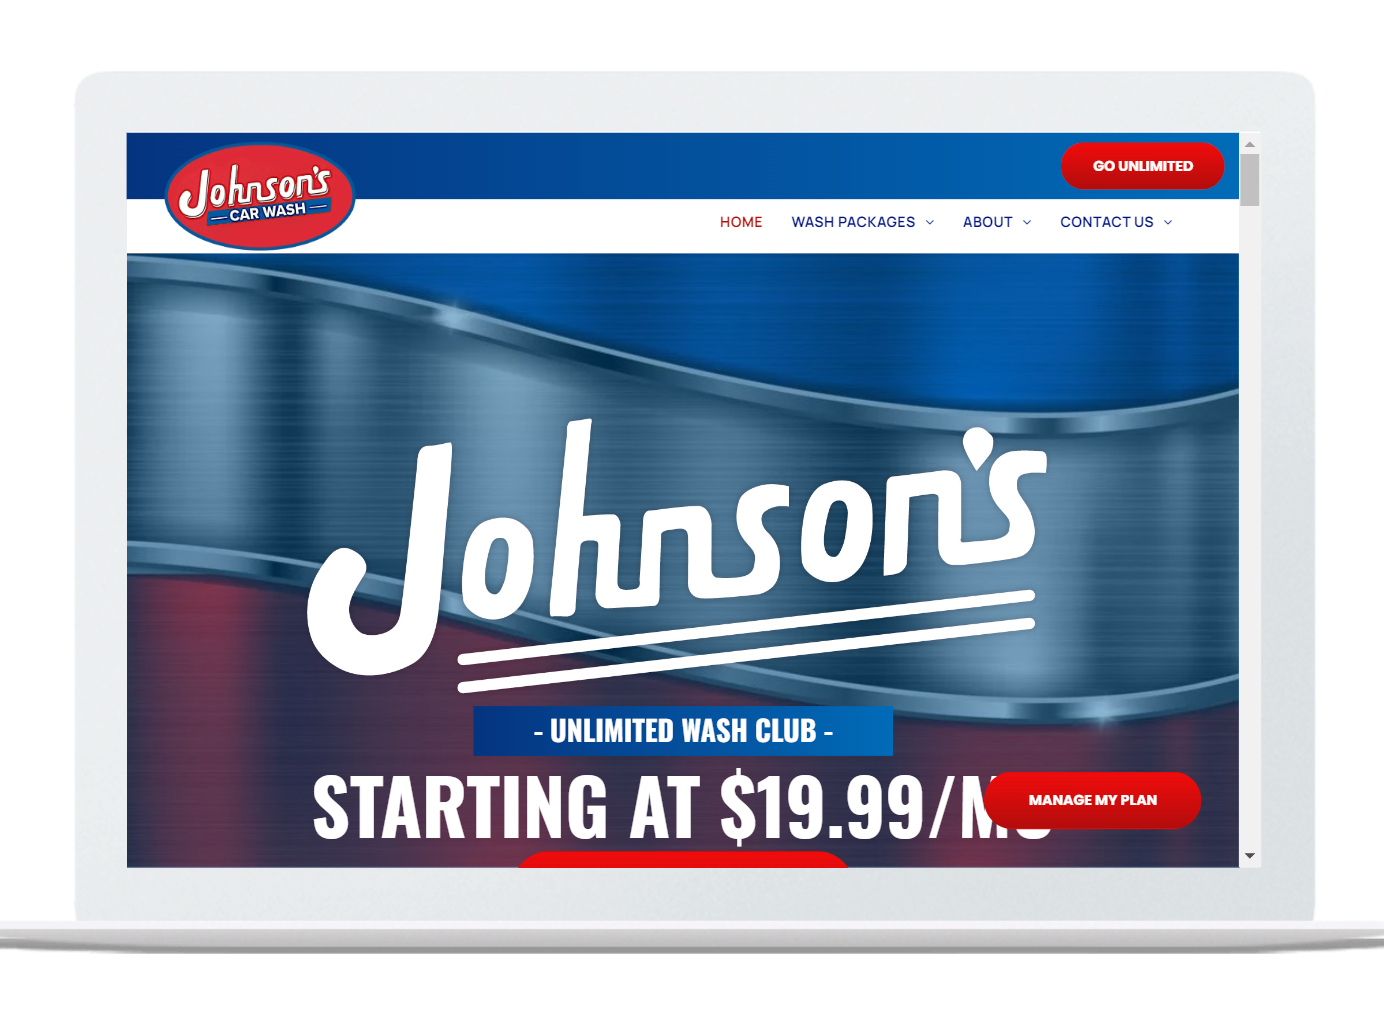 Johnson Car Wash in Wayne, Michigan. Full service carwash website owned by Terry Johnson. Website made by OhmCo, the best carwash websites in the wash and water treatment industry